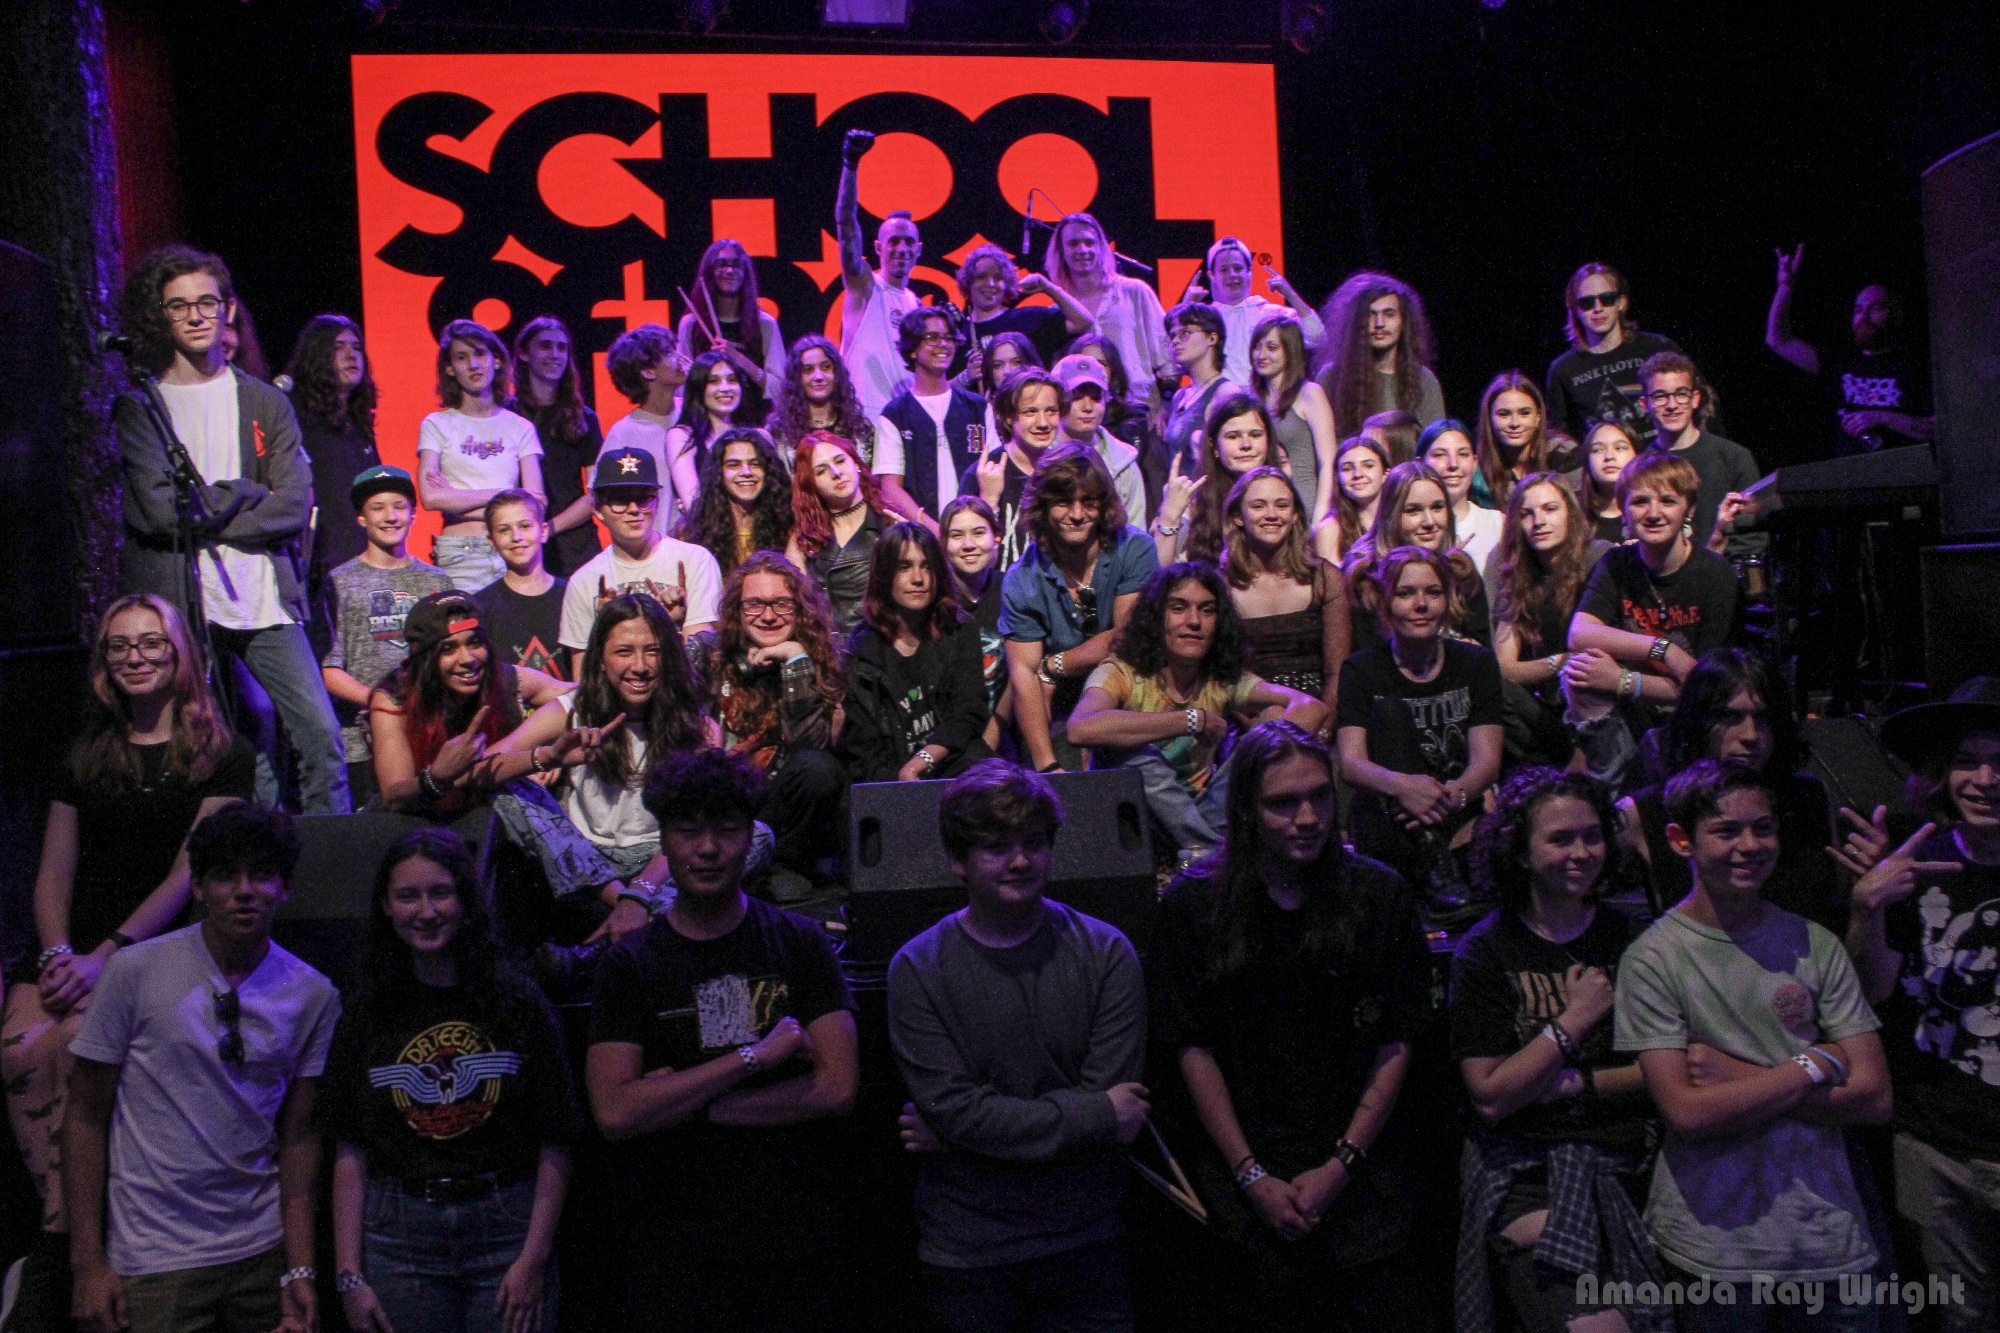 School of Rock House Bands from across DFW came together to perform live with Frank Zummo, the drummer of Sum 41 at the legendary Tree's in Deep Ellum!
Each participating school will had a unique House Band Set followed by an hour long Sum41 set where schools rotated playing classic Sum41 songs along w/ Frank Zummo!
The event also featured a solo set by Frank, Giveaways, Q&A session and a Meet & Greet w/ Zummo himself!!!